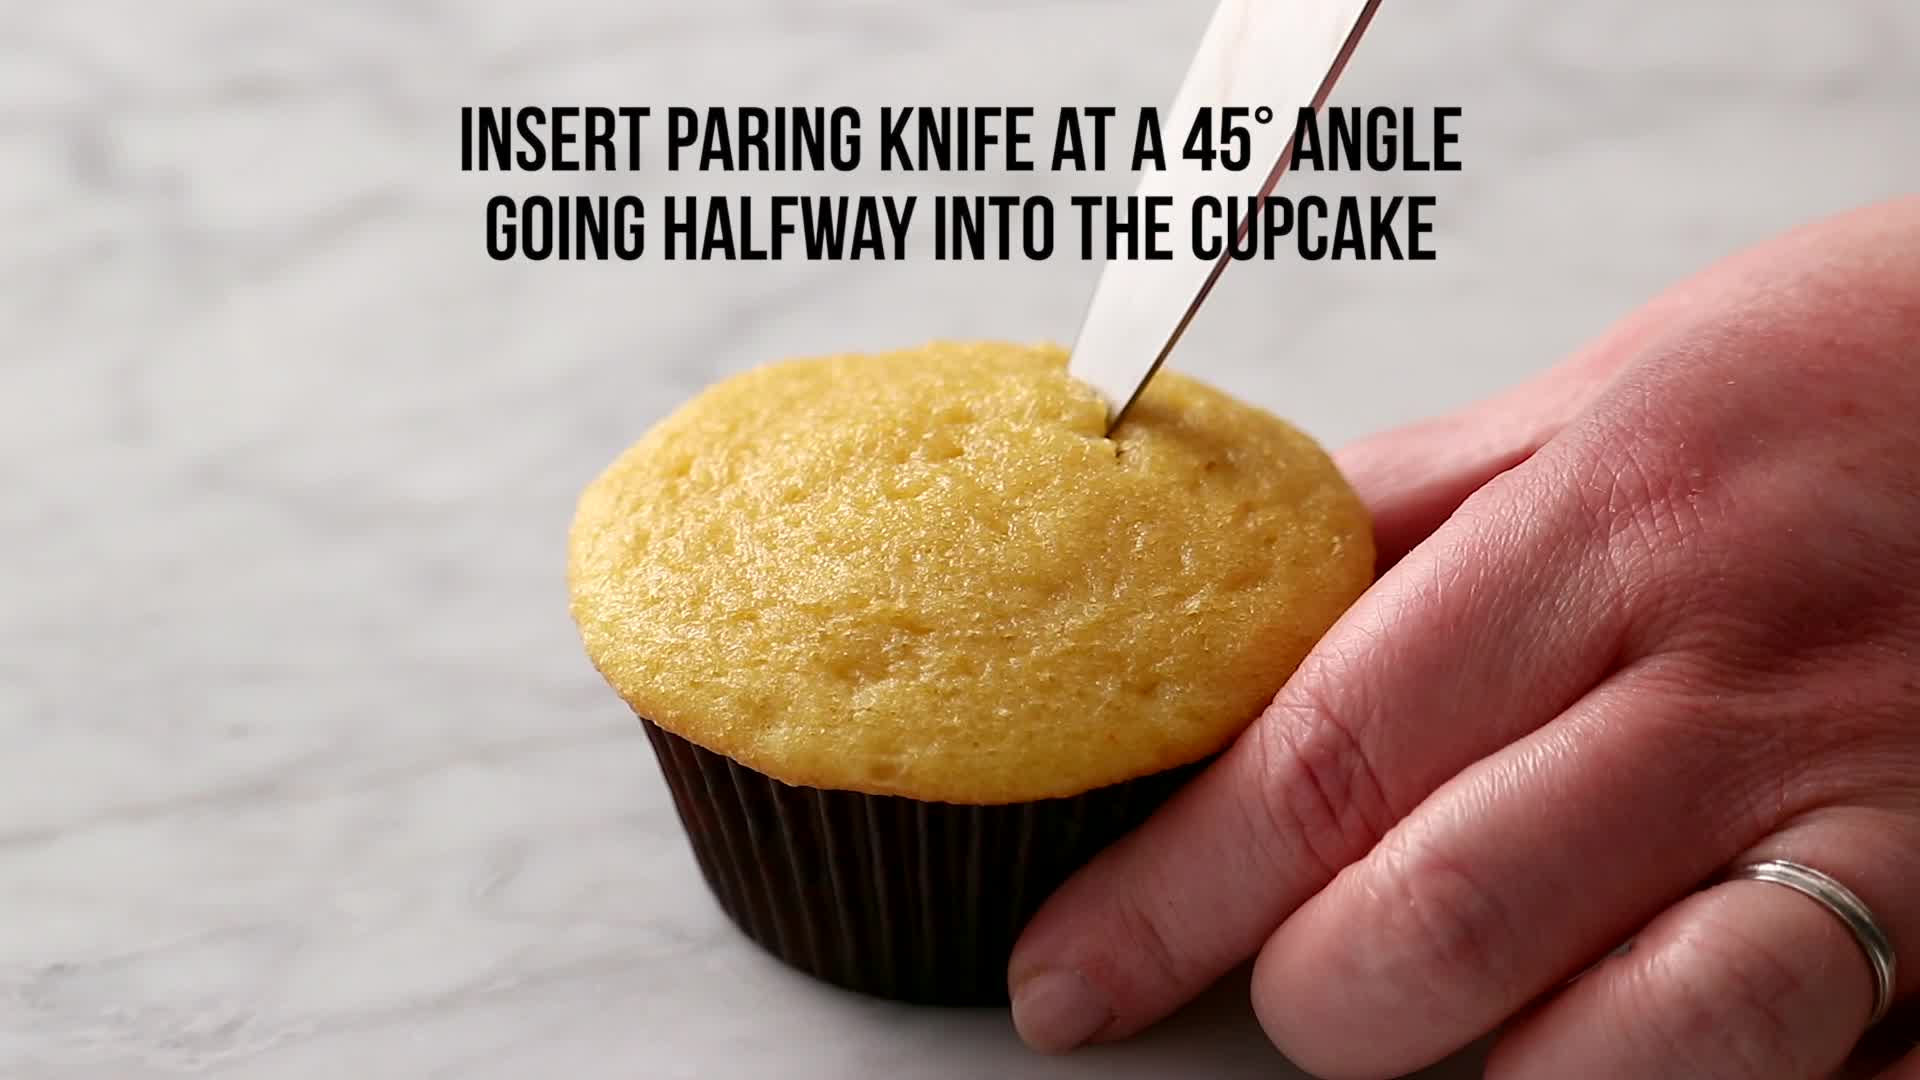 Cupcake scoop  This tool fills cupcake pans without the mess